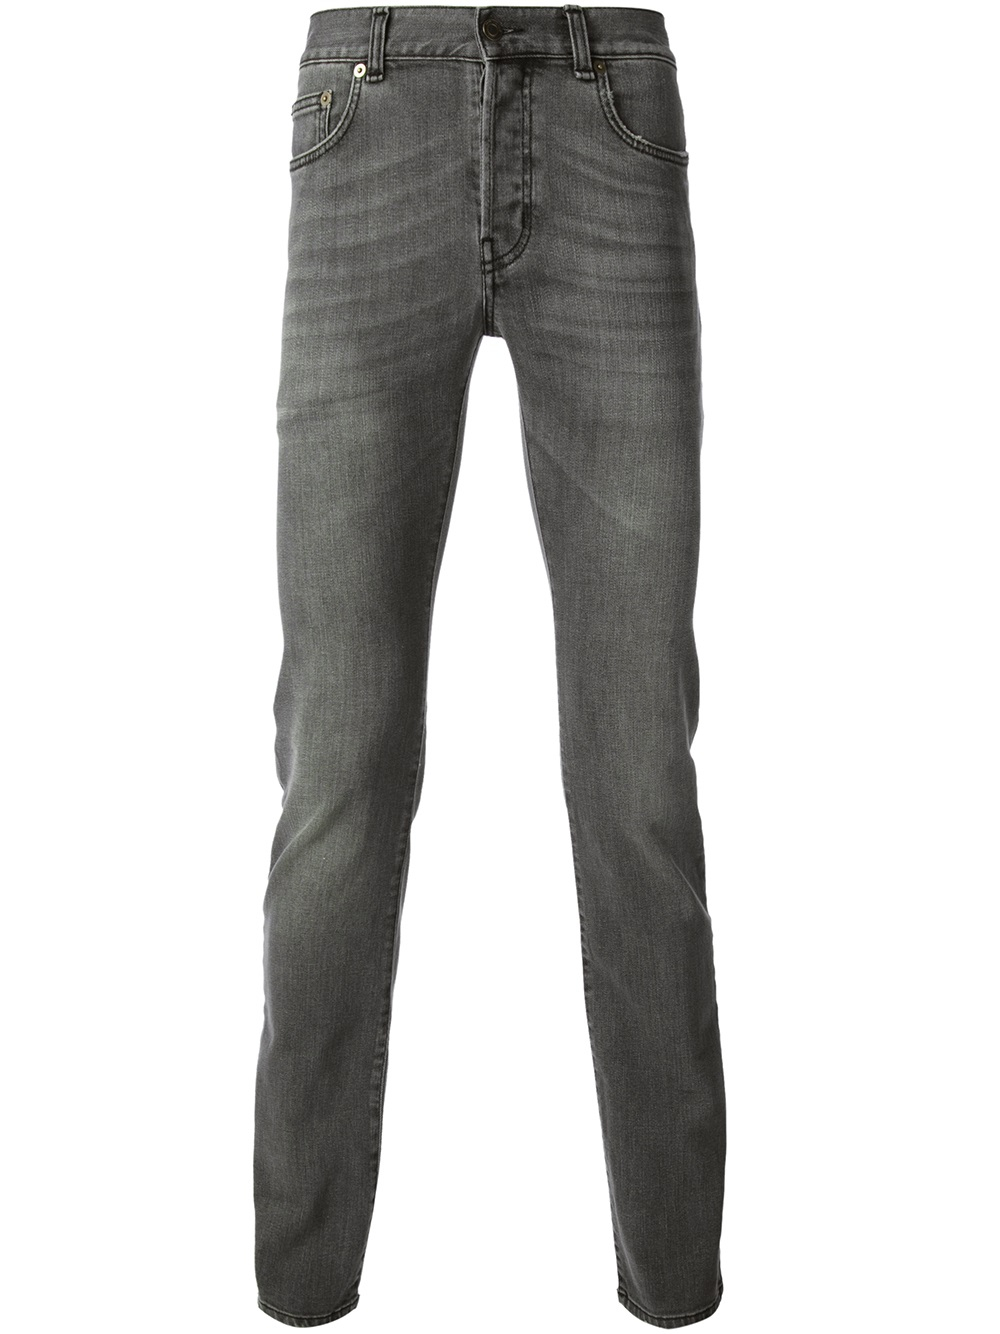 Saint Laurent Stone Washed Jeans in Grey (Gray) for Men - Lyst